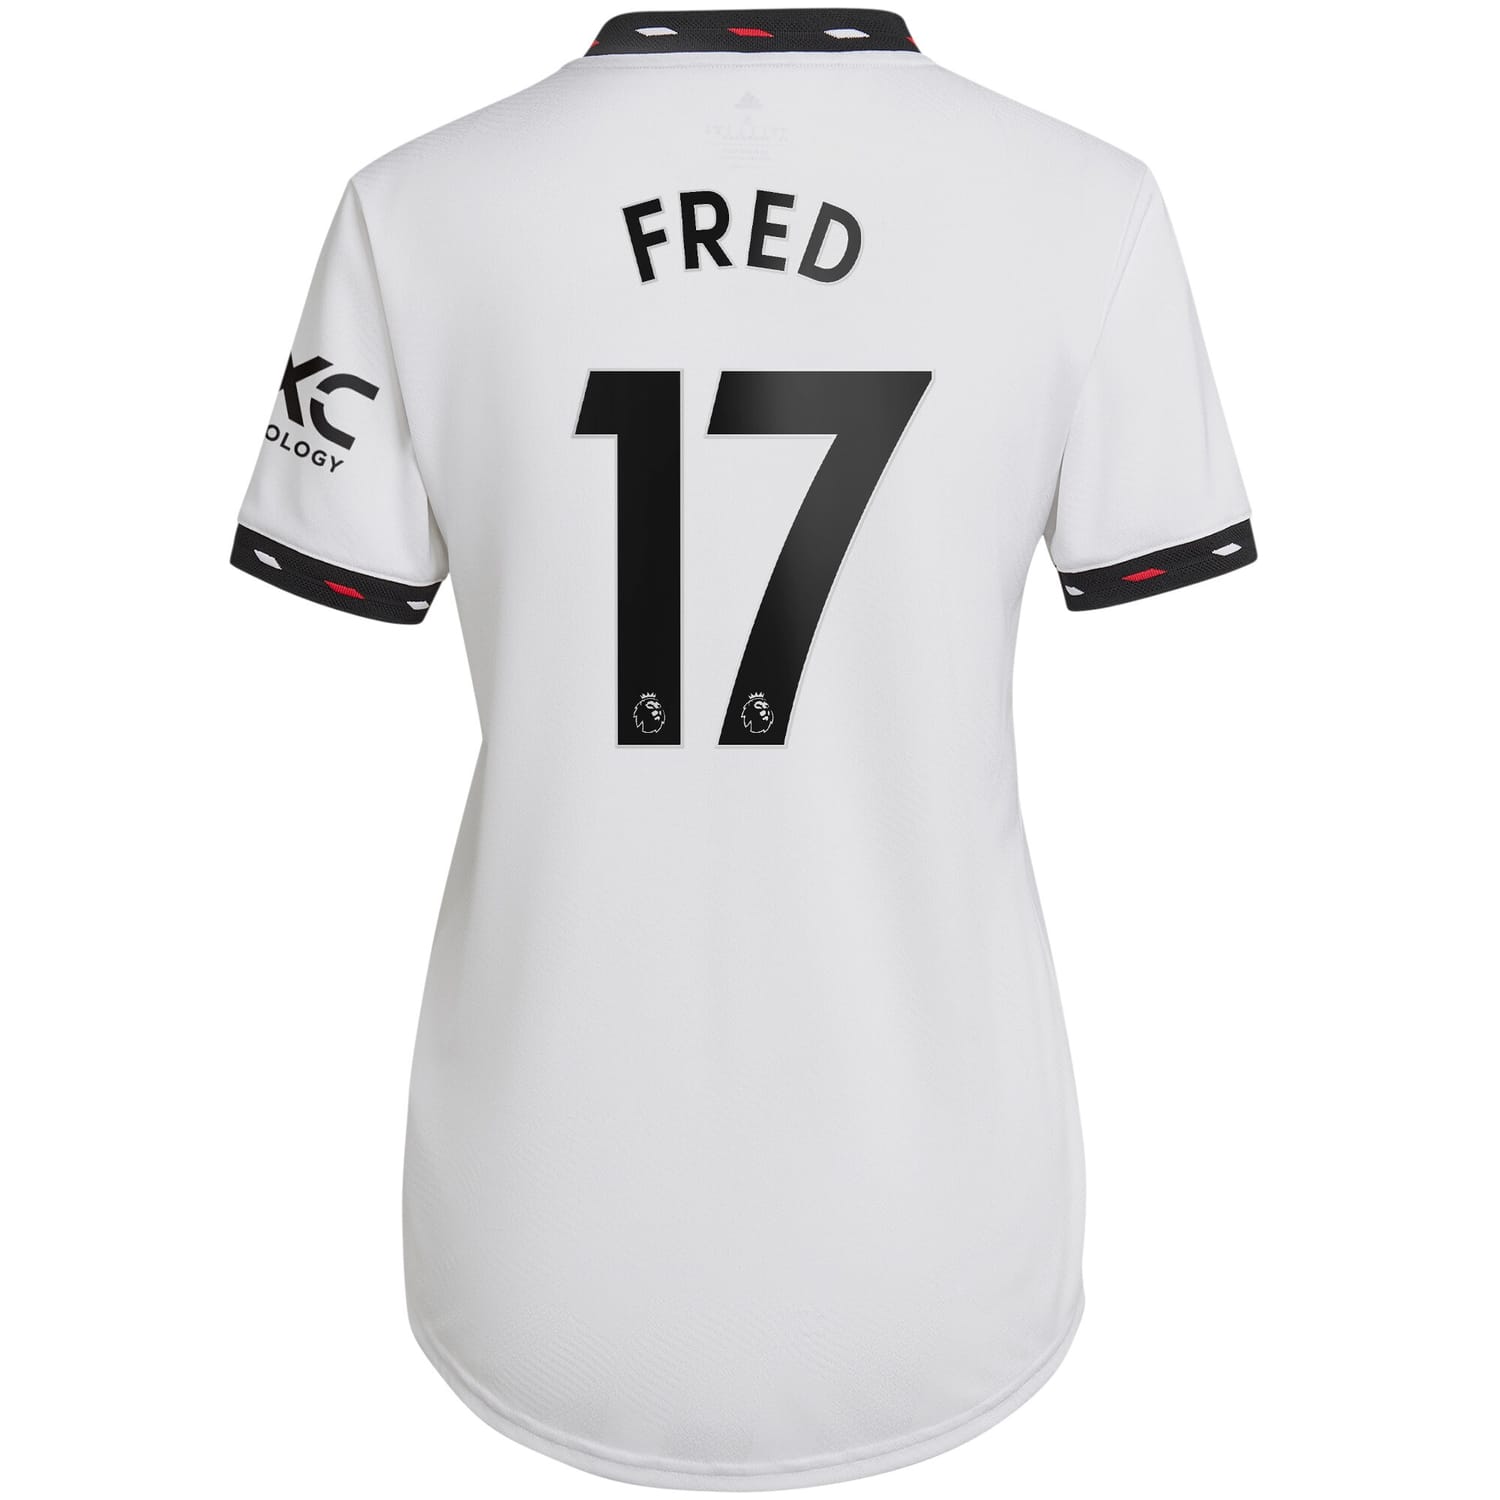 Premier League Manchester United Away Authentic Jersey Shirt 2022-23 player Fred 17 printing for Women